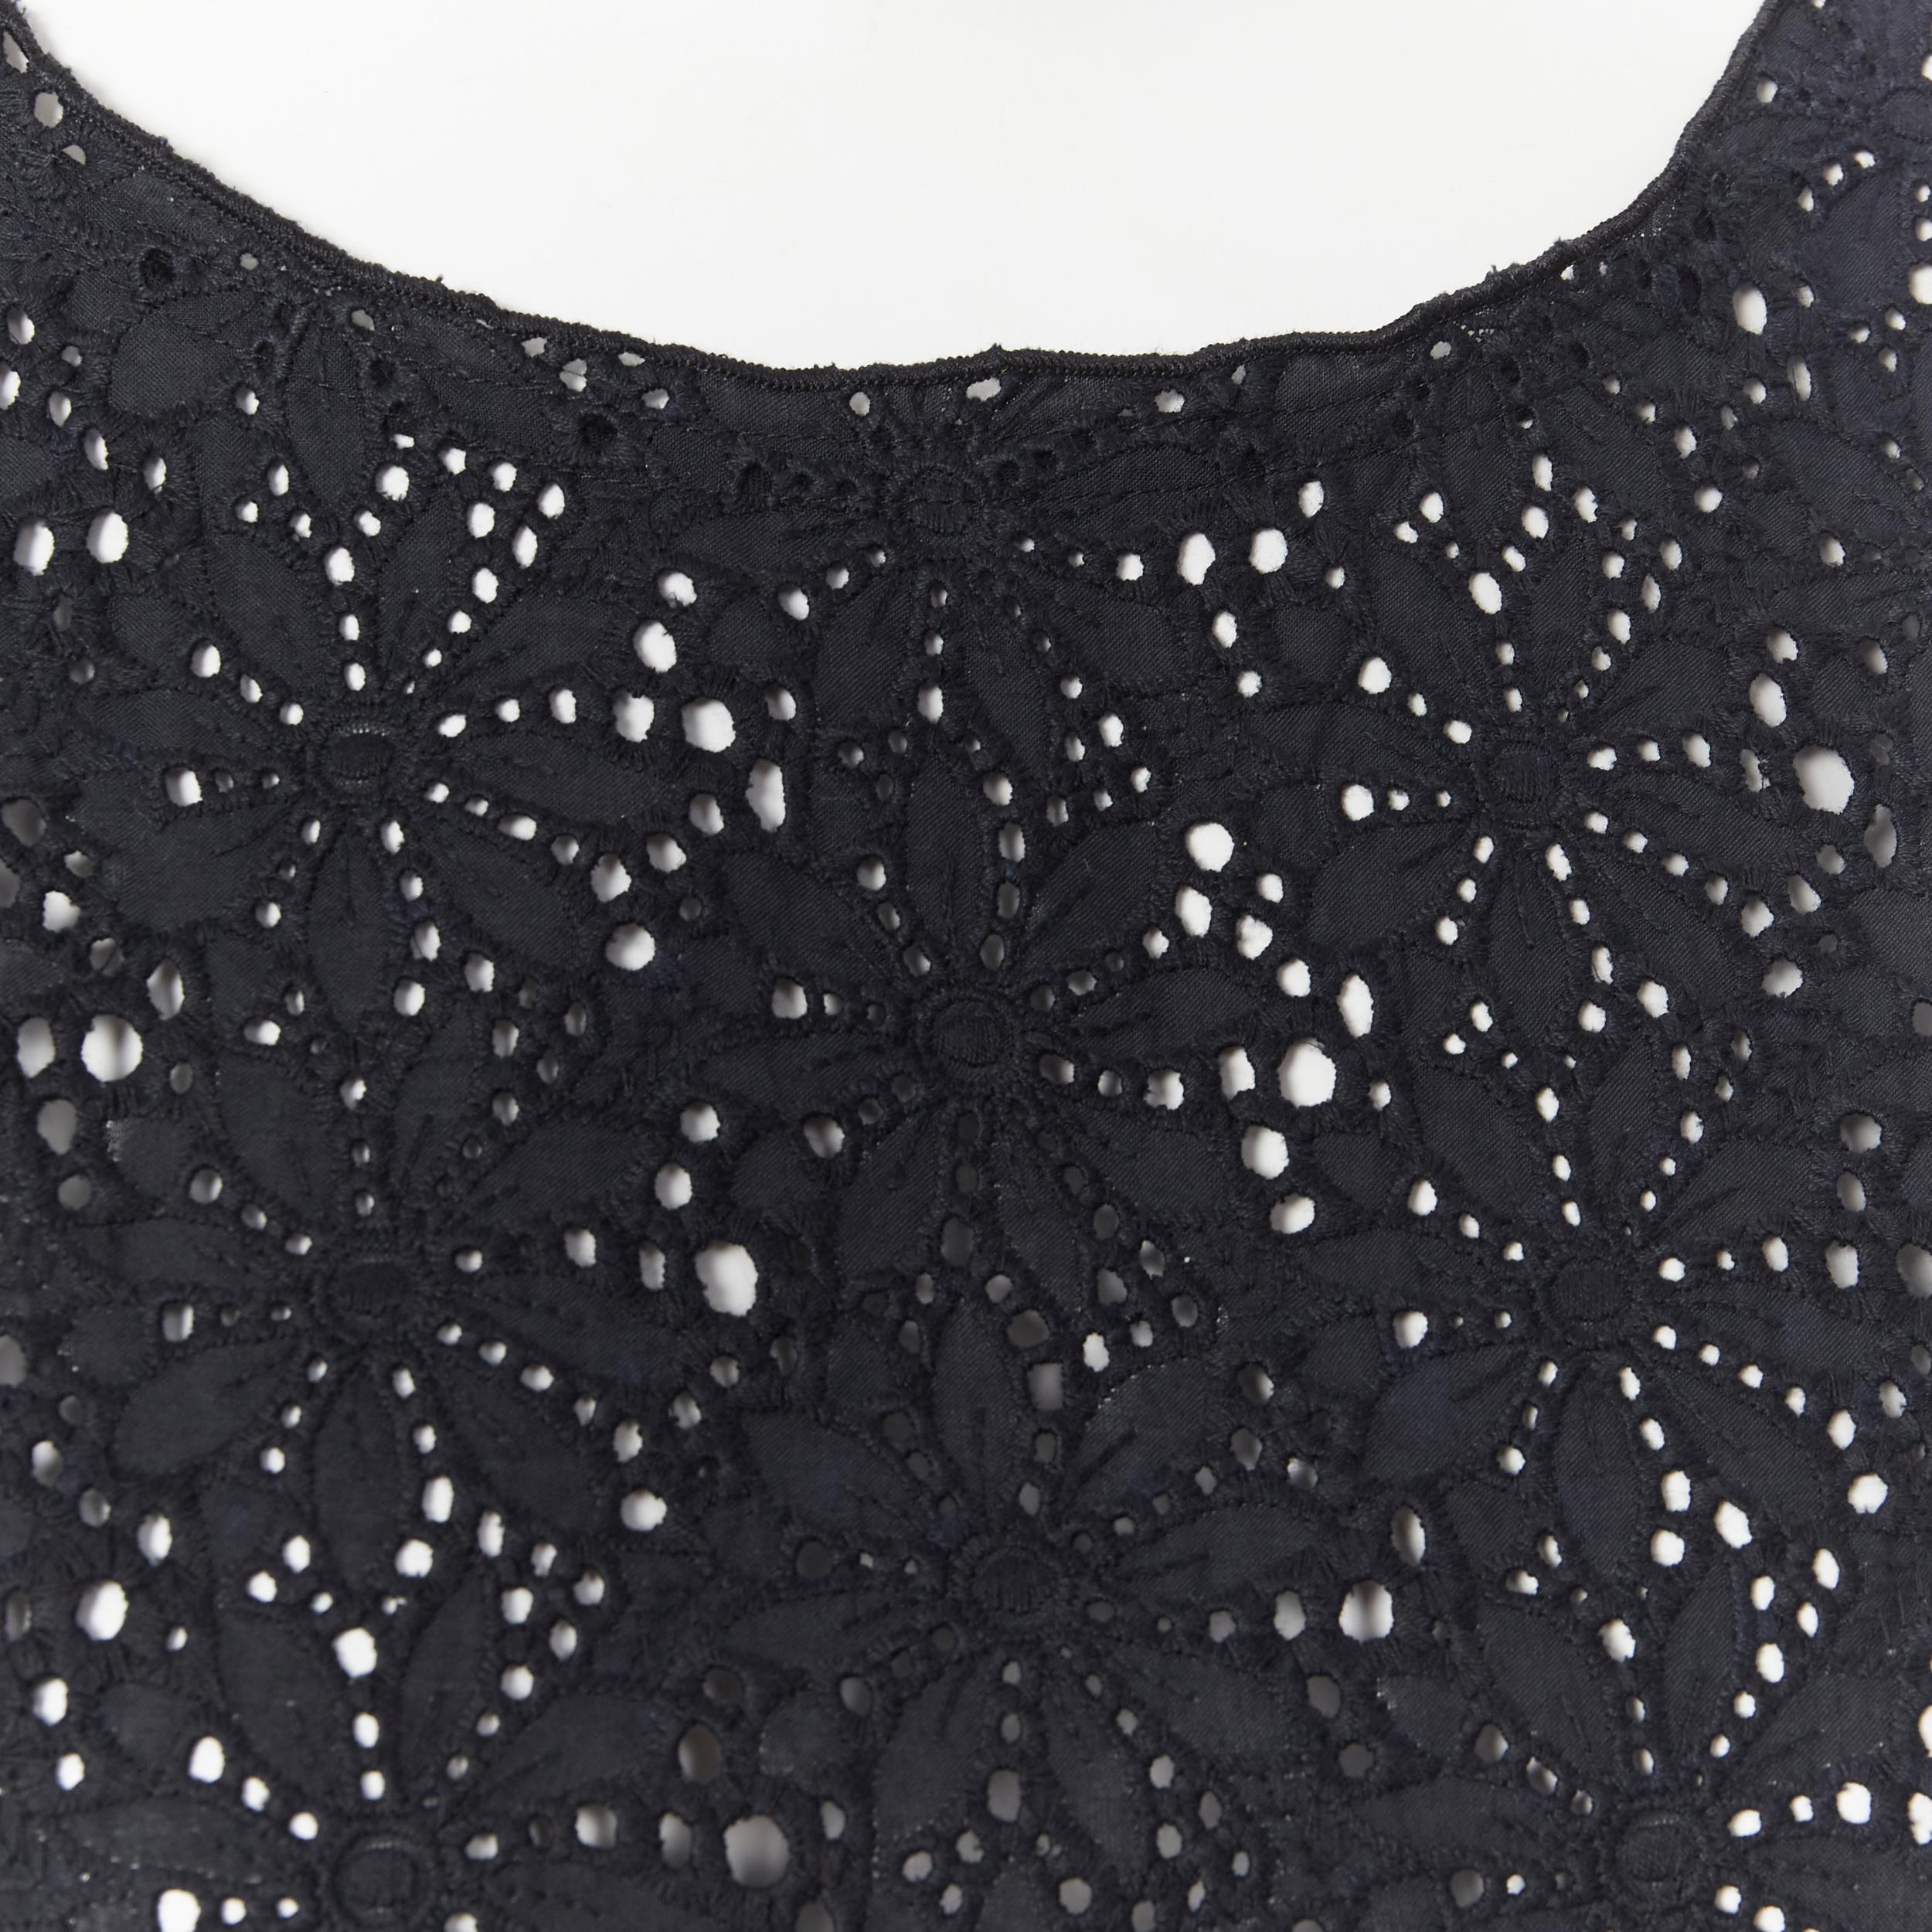 LISA PERRY 100% cotton black floral embroidery anglaise sleeveless top US2 
Reference: LNKO/A01253 
Brand: Lisa Perry 
Material: Cotton 
Color: Black 
Pattern: Floral 
Extra Detail: Floral embroidery anglaise. A-line cut. 
Made in: United States